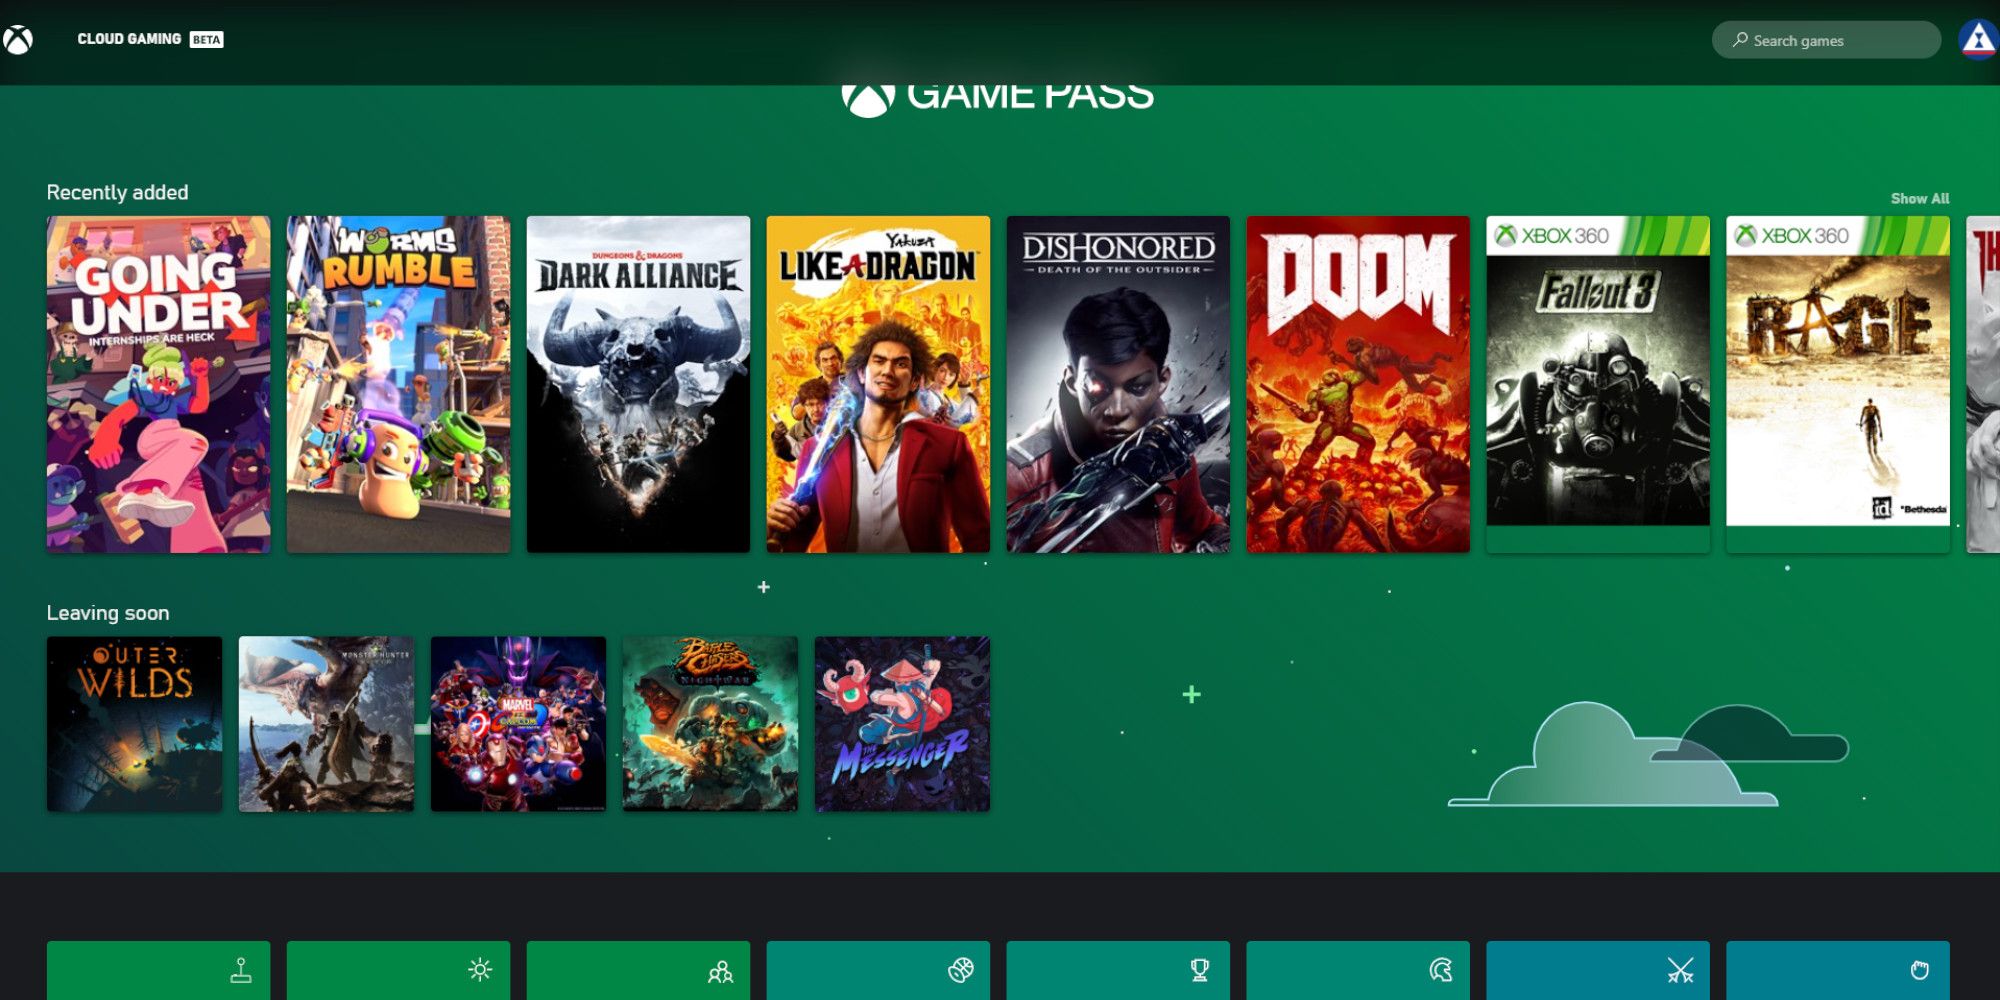 xbox game pass mobile games list